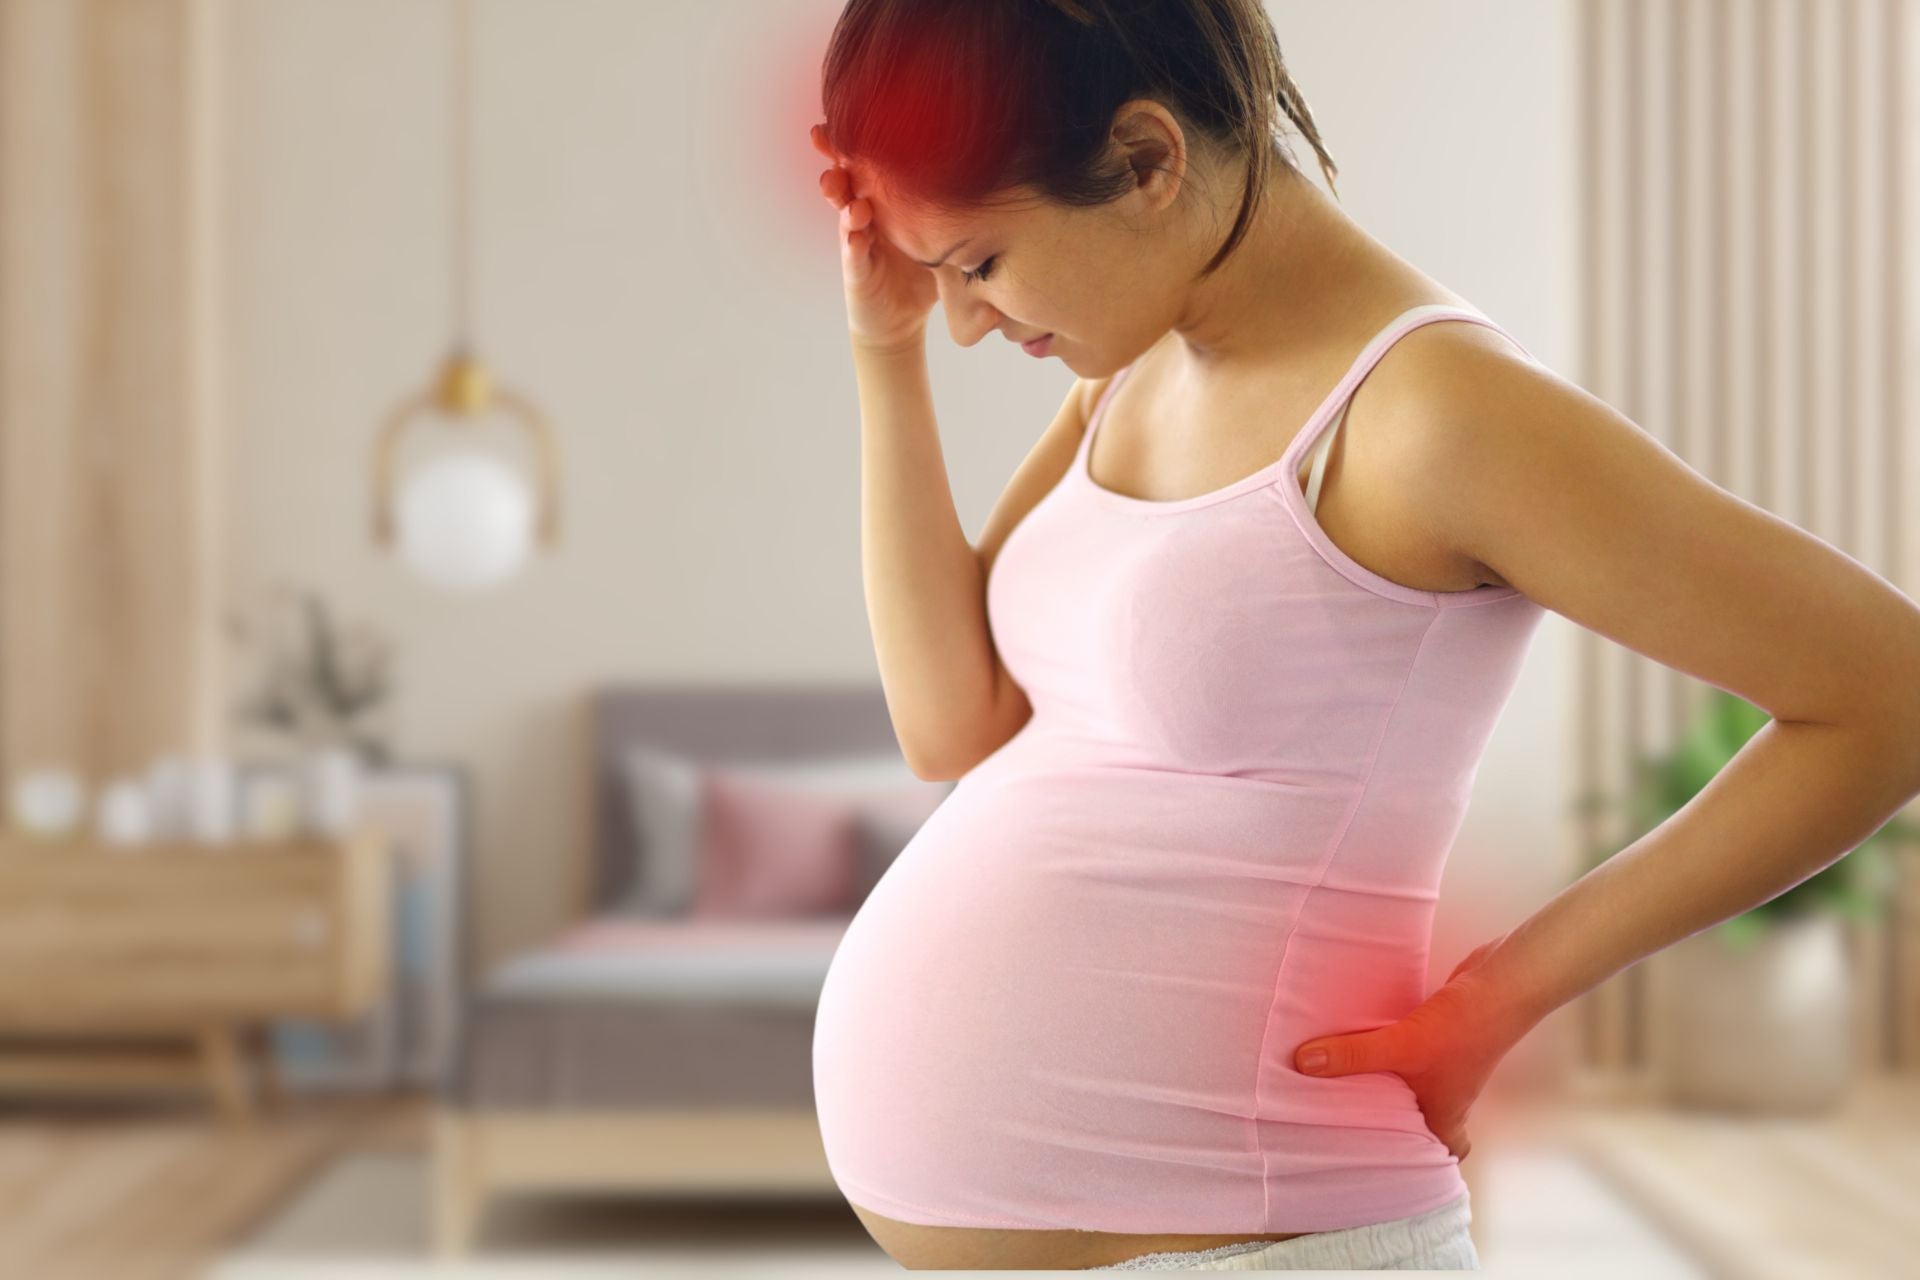 An image of a pregnant woman experiencing headach and lower back pain.